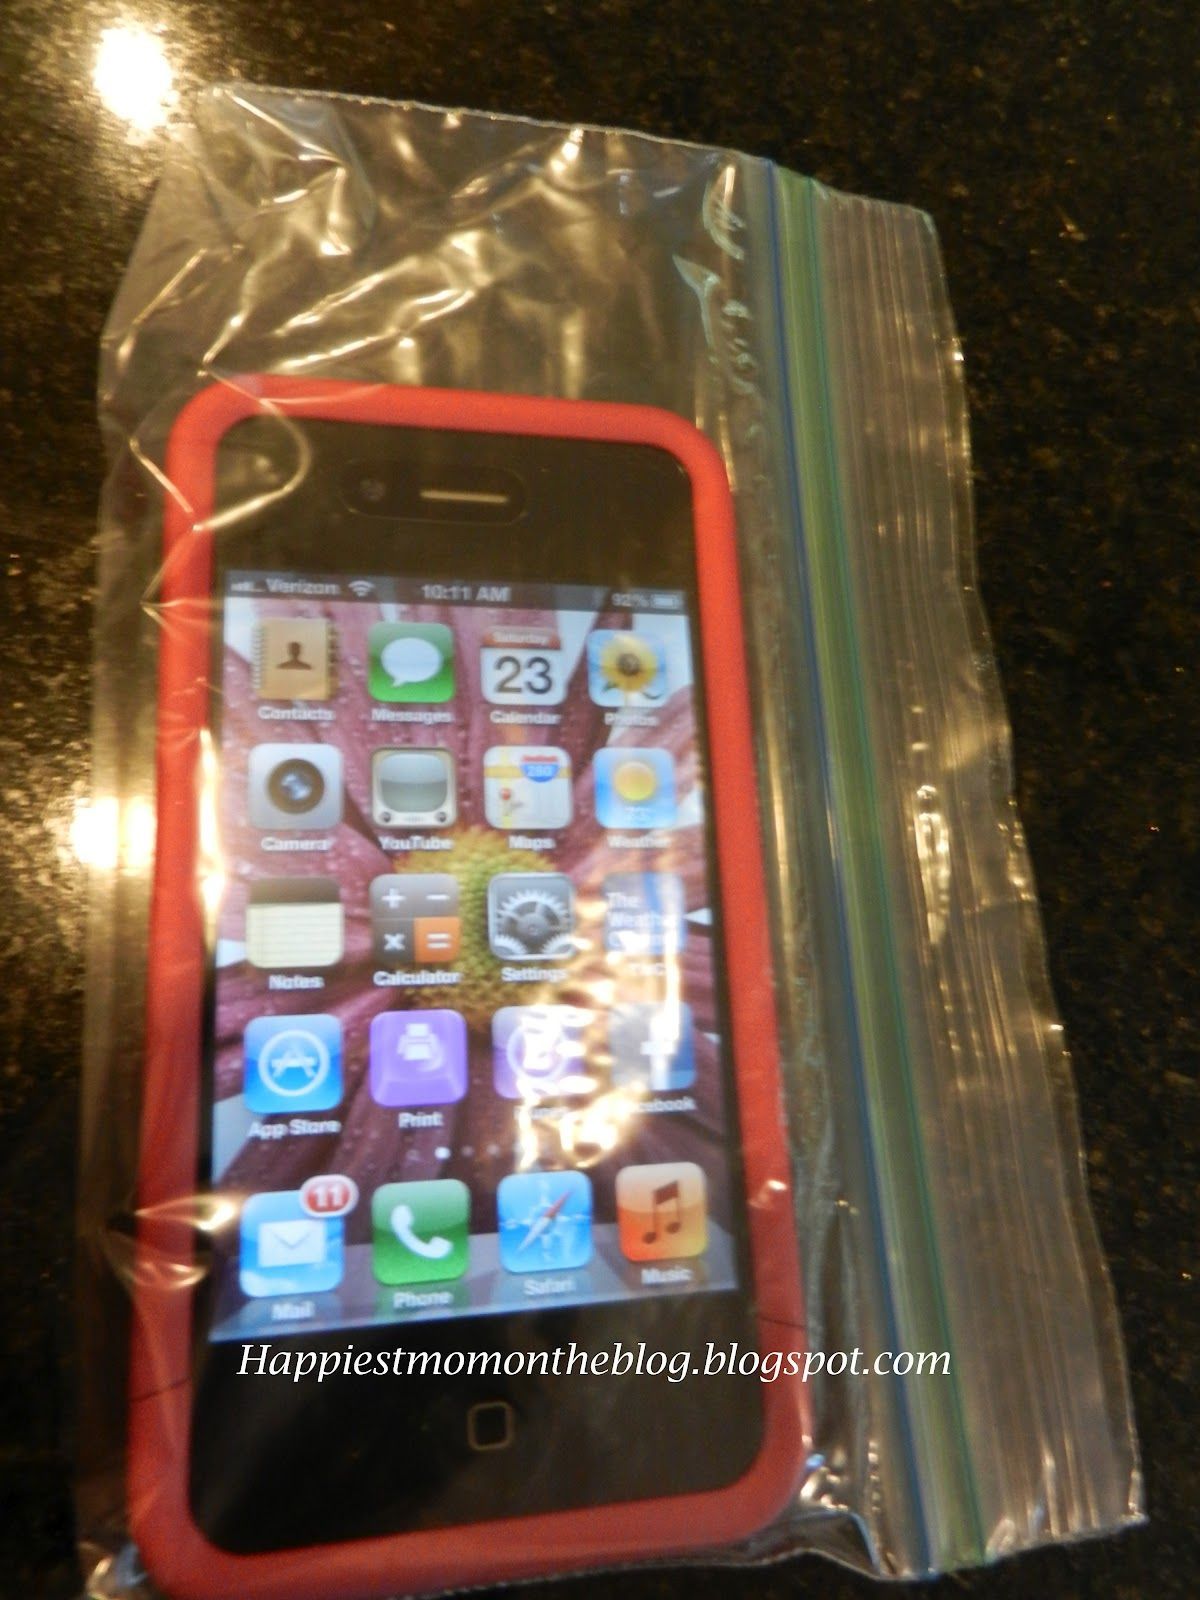 When ever we go to the pool or beach, I place my phone in a snack size ziplock b